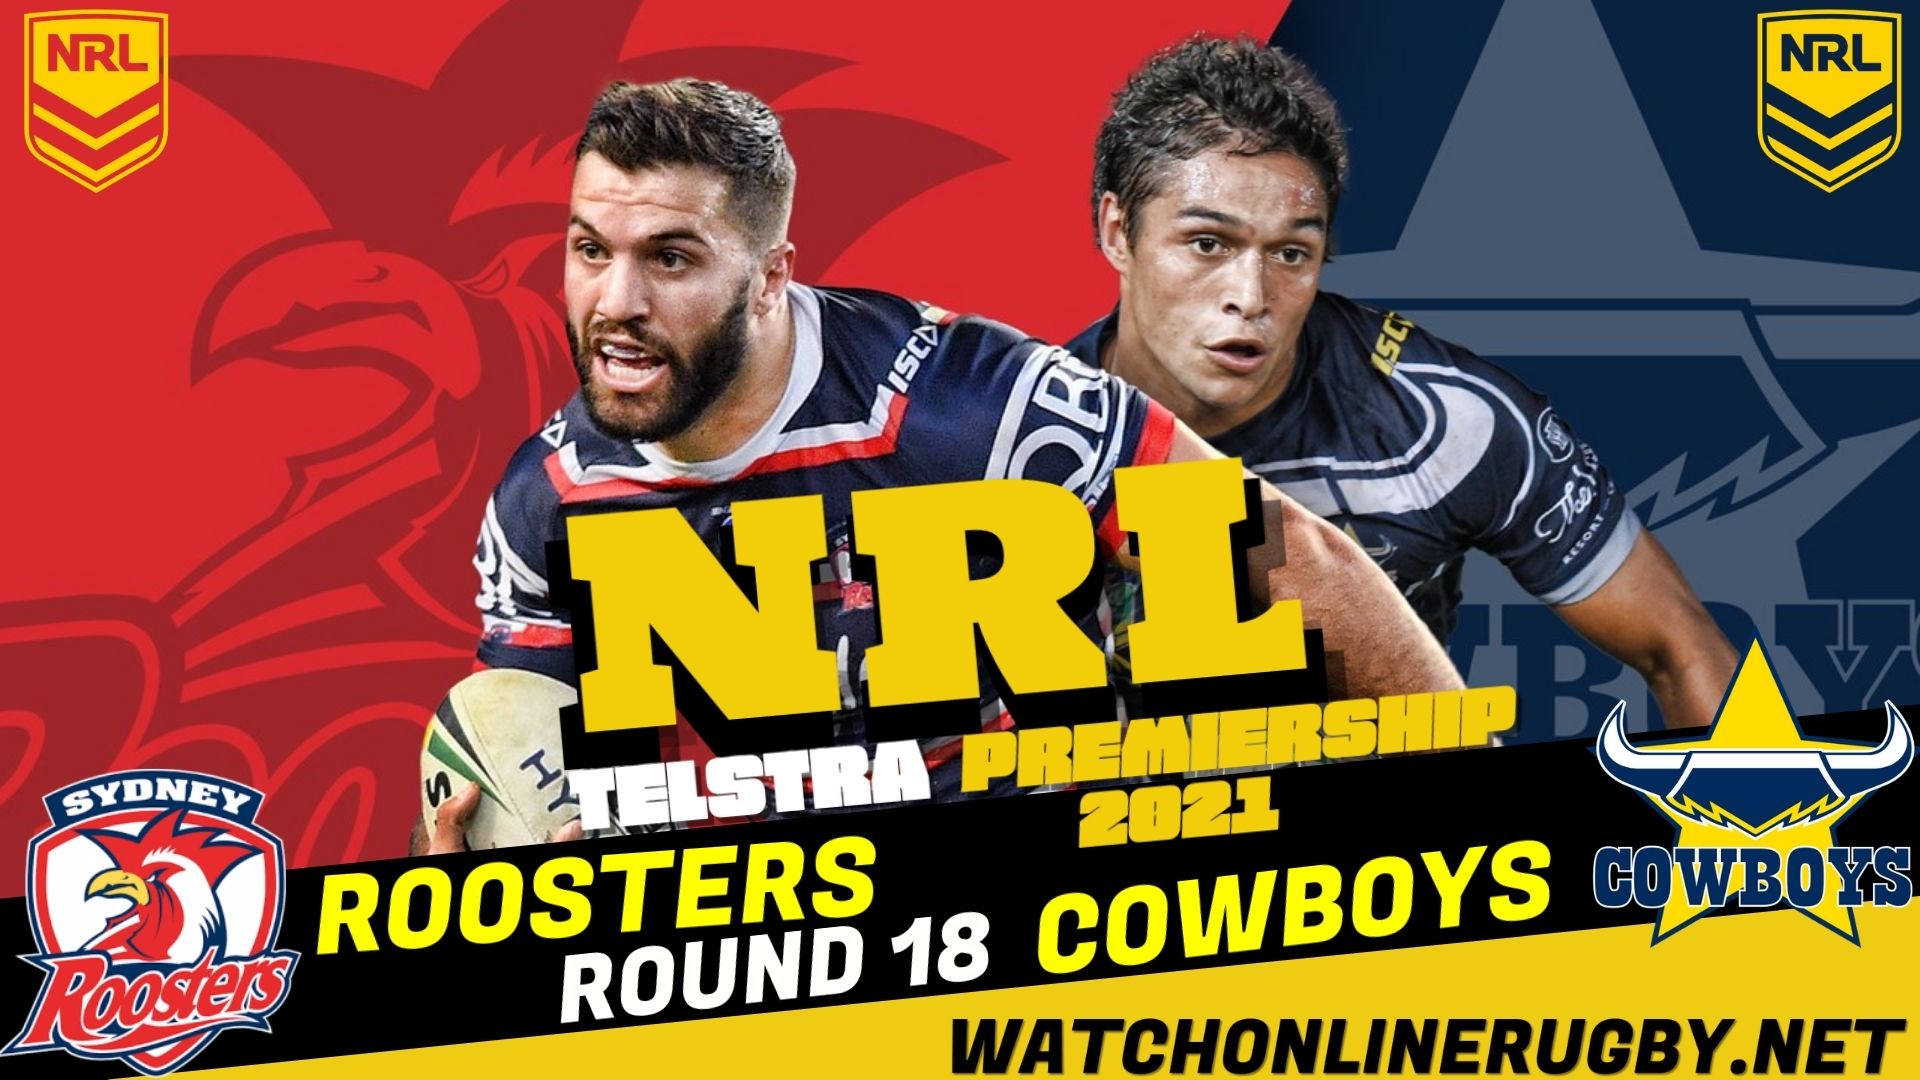 Watch Roosters VS Cowboys Live Stream